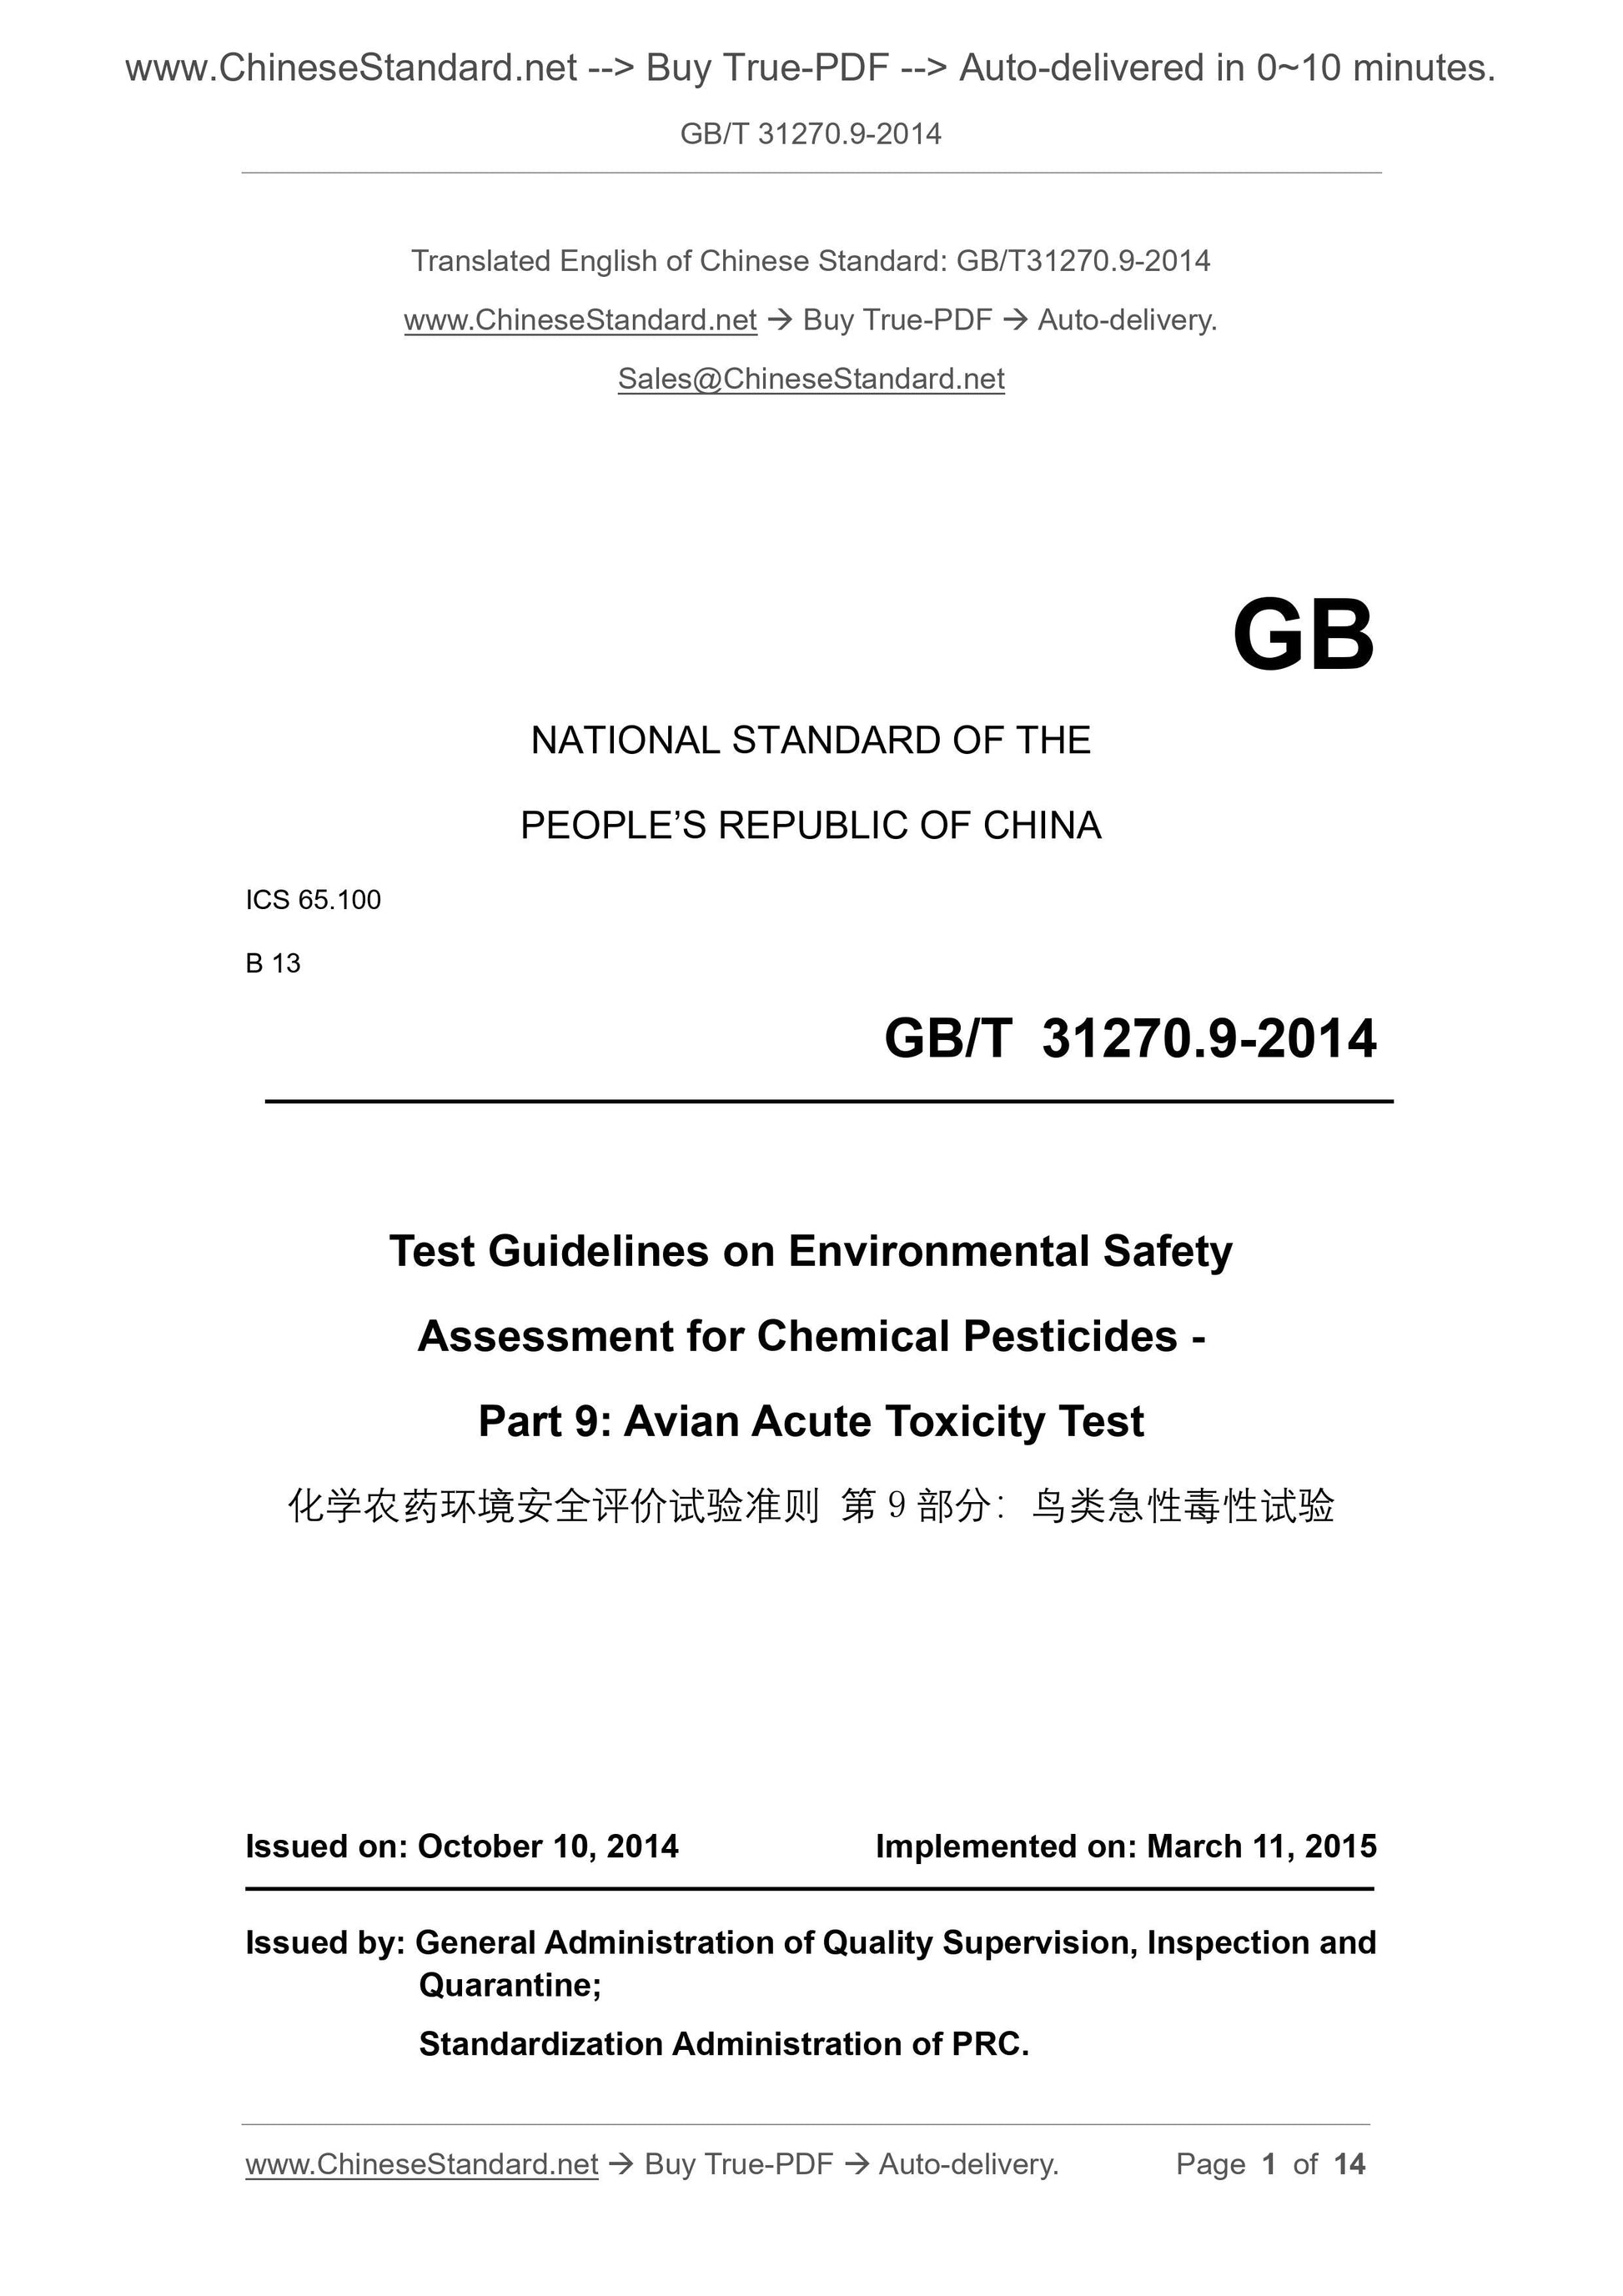 GB/T 31270.9-2014 Page 1